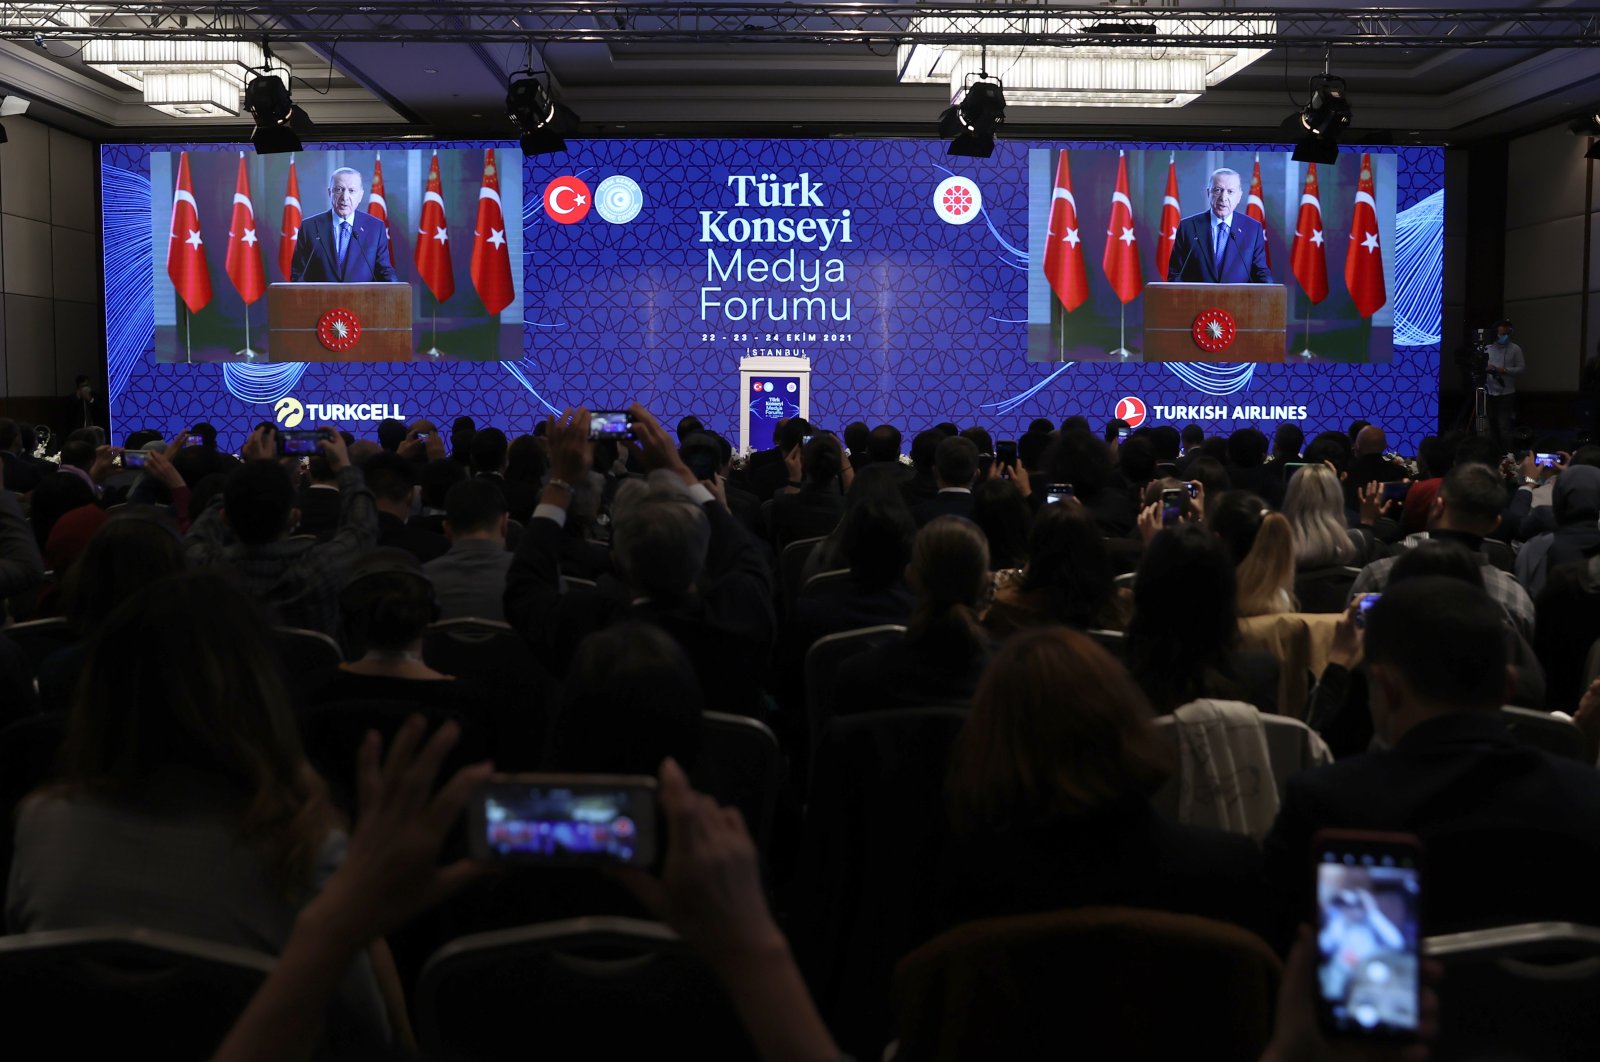 Turkic Council Media Forum hosted by the Presidency's Directorate of Communications held in Istanbul with the theme of "Rooted Past, Strong Future," Oct. 22, 2021. (AA Photo)